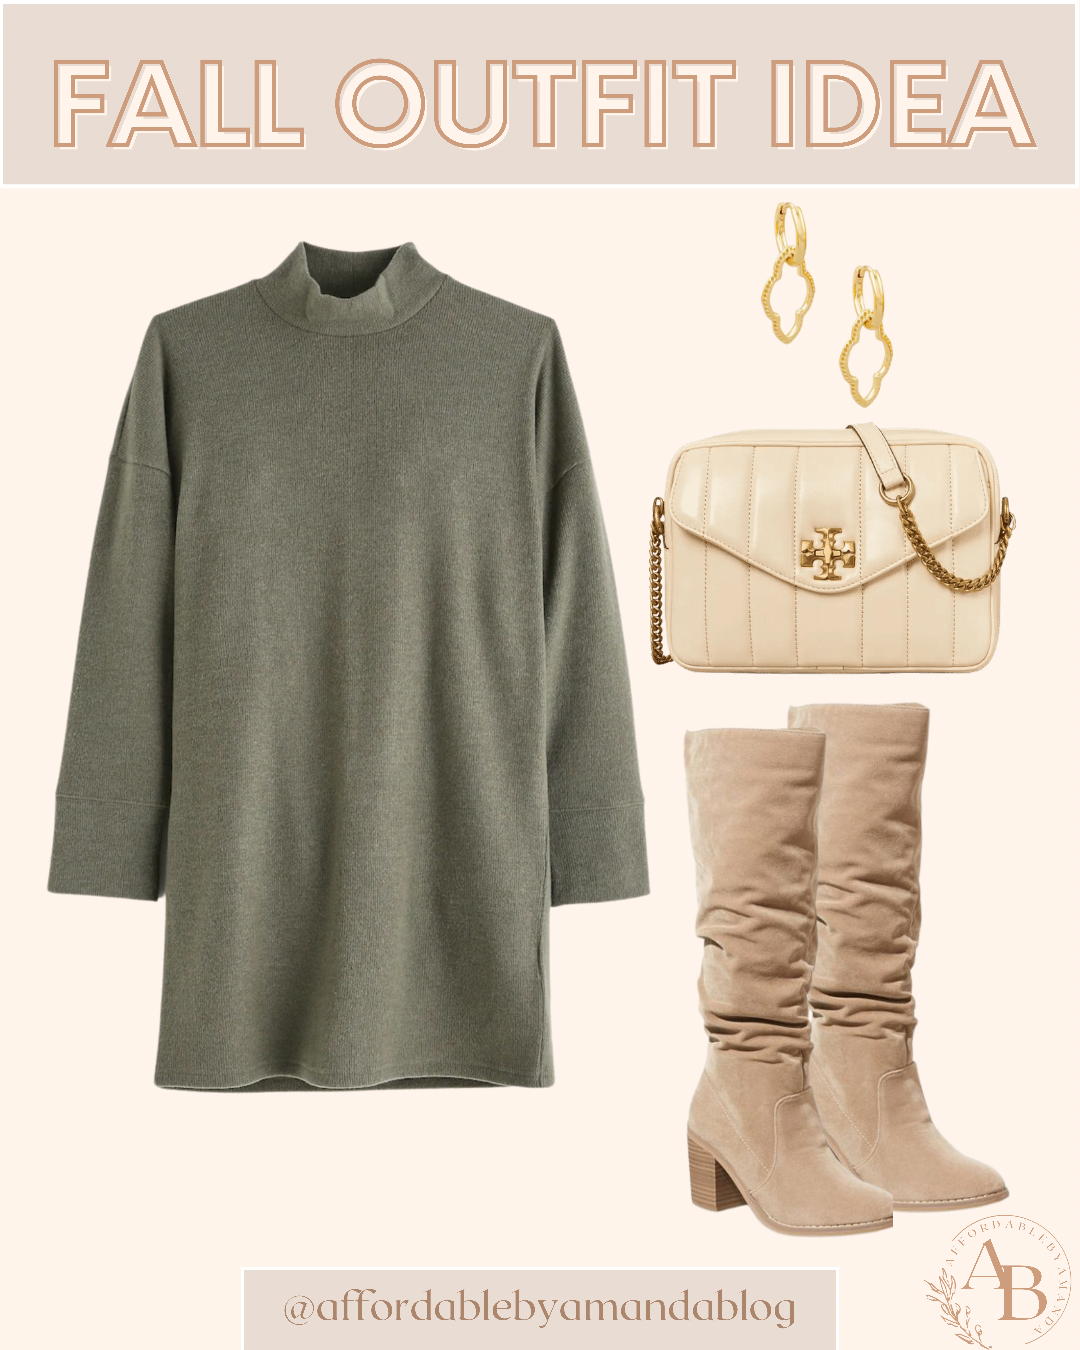 Fall Outfit Ideas 2021 - Affordable by Amanda